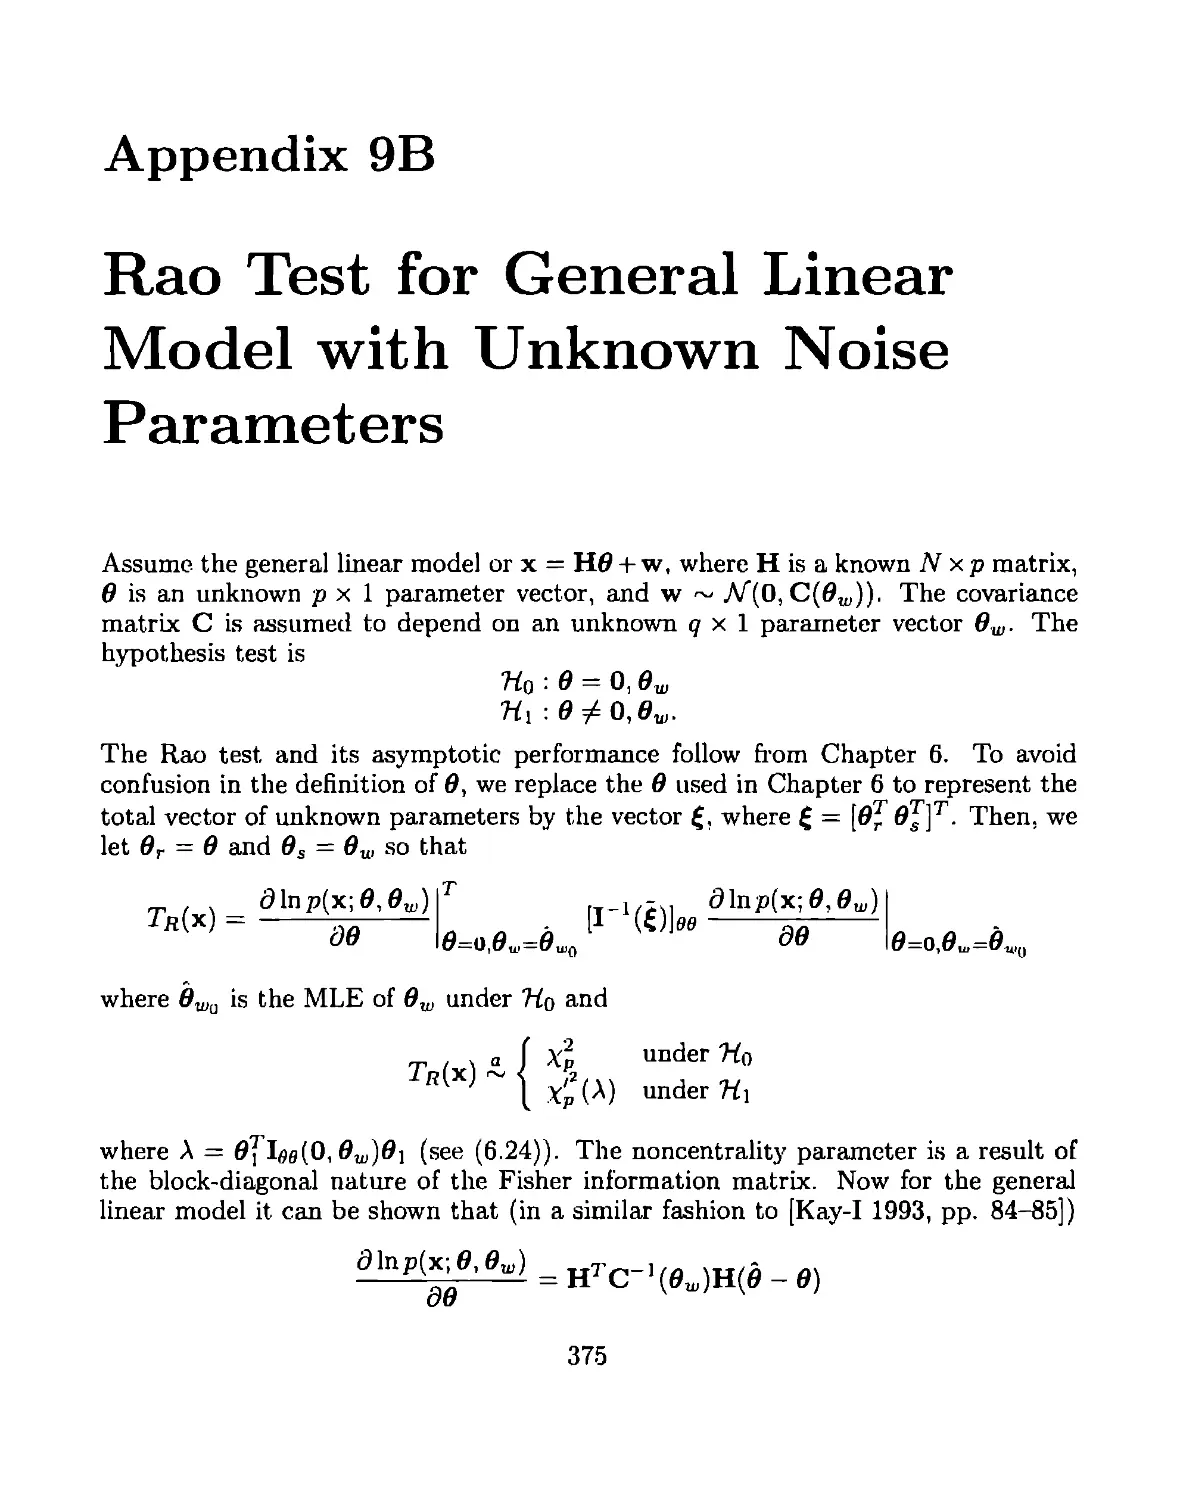 Appendix 9B Rao Test for General Linear Model with Unknown Noise Parameters